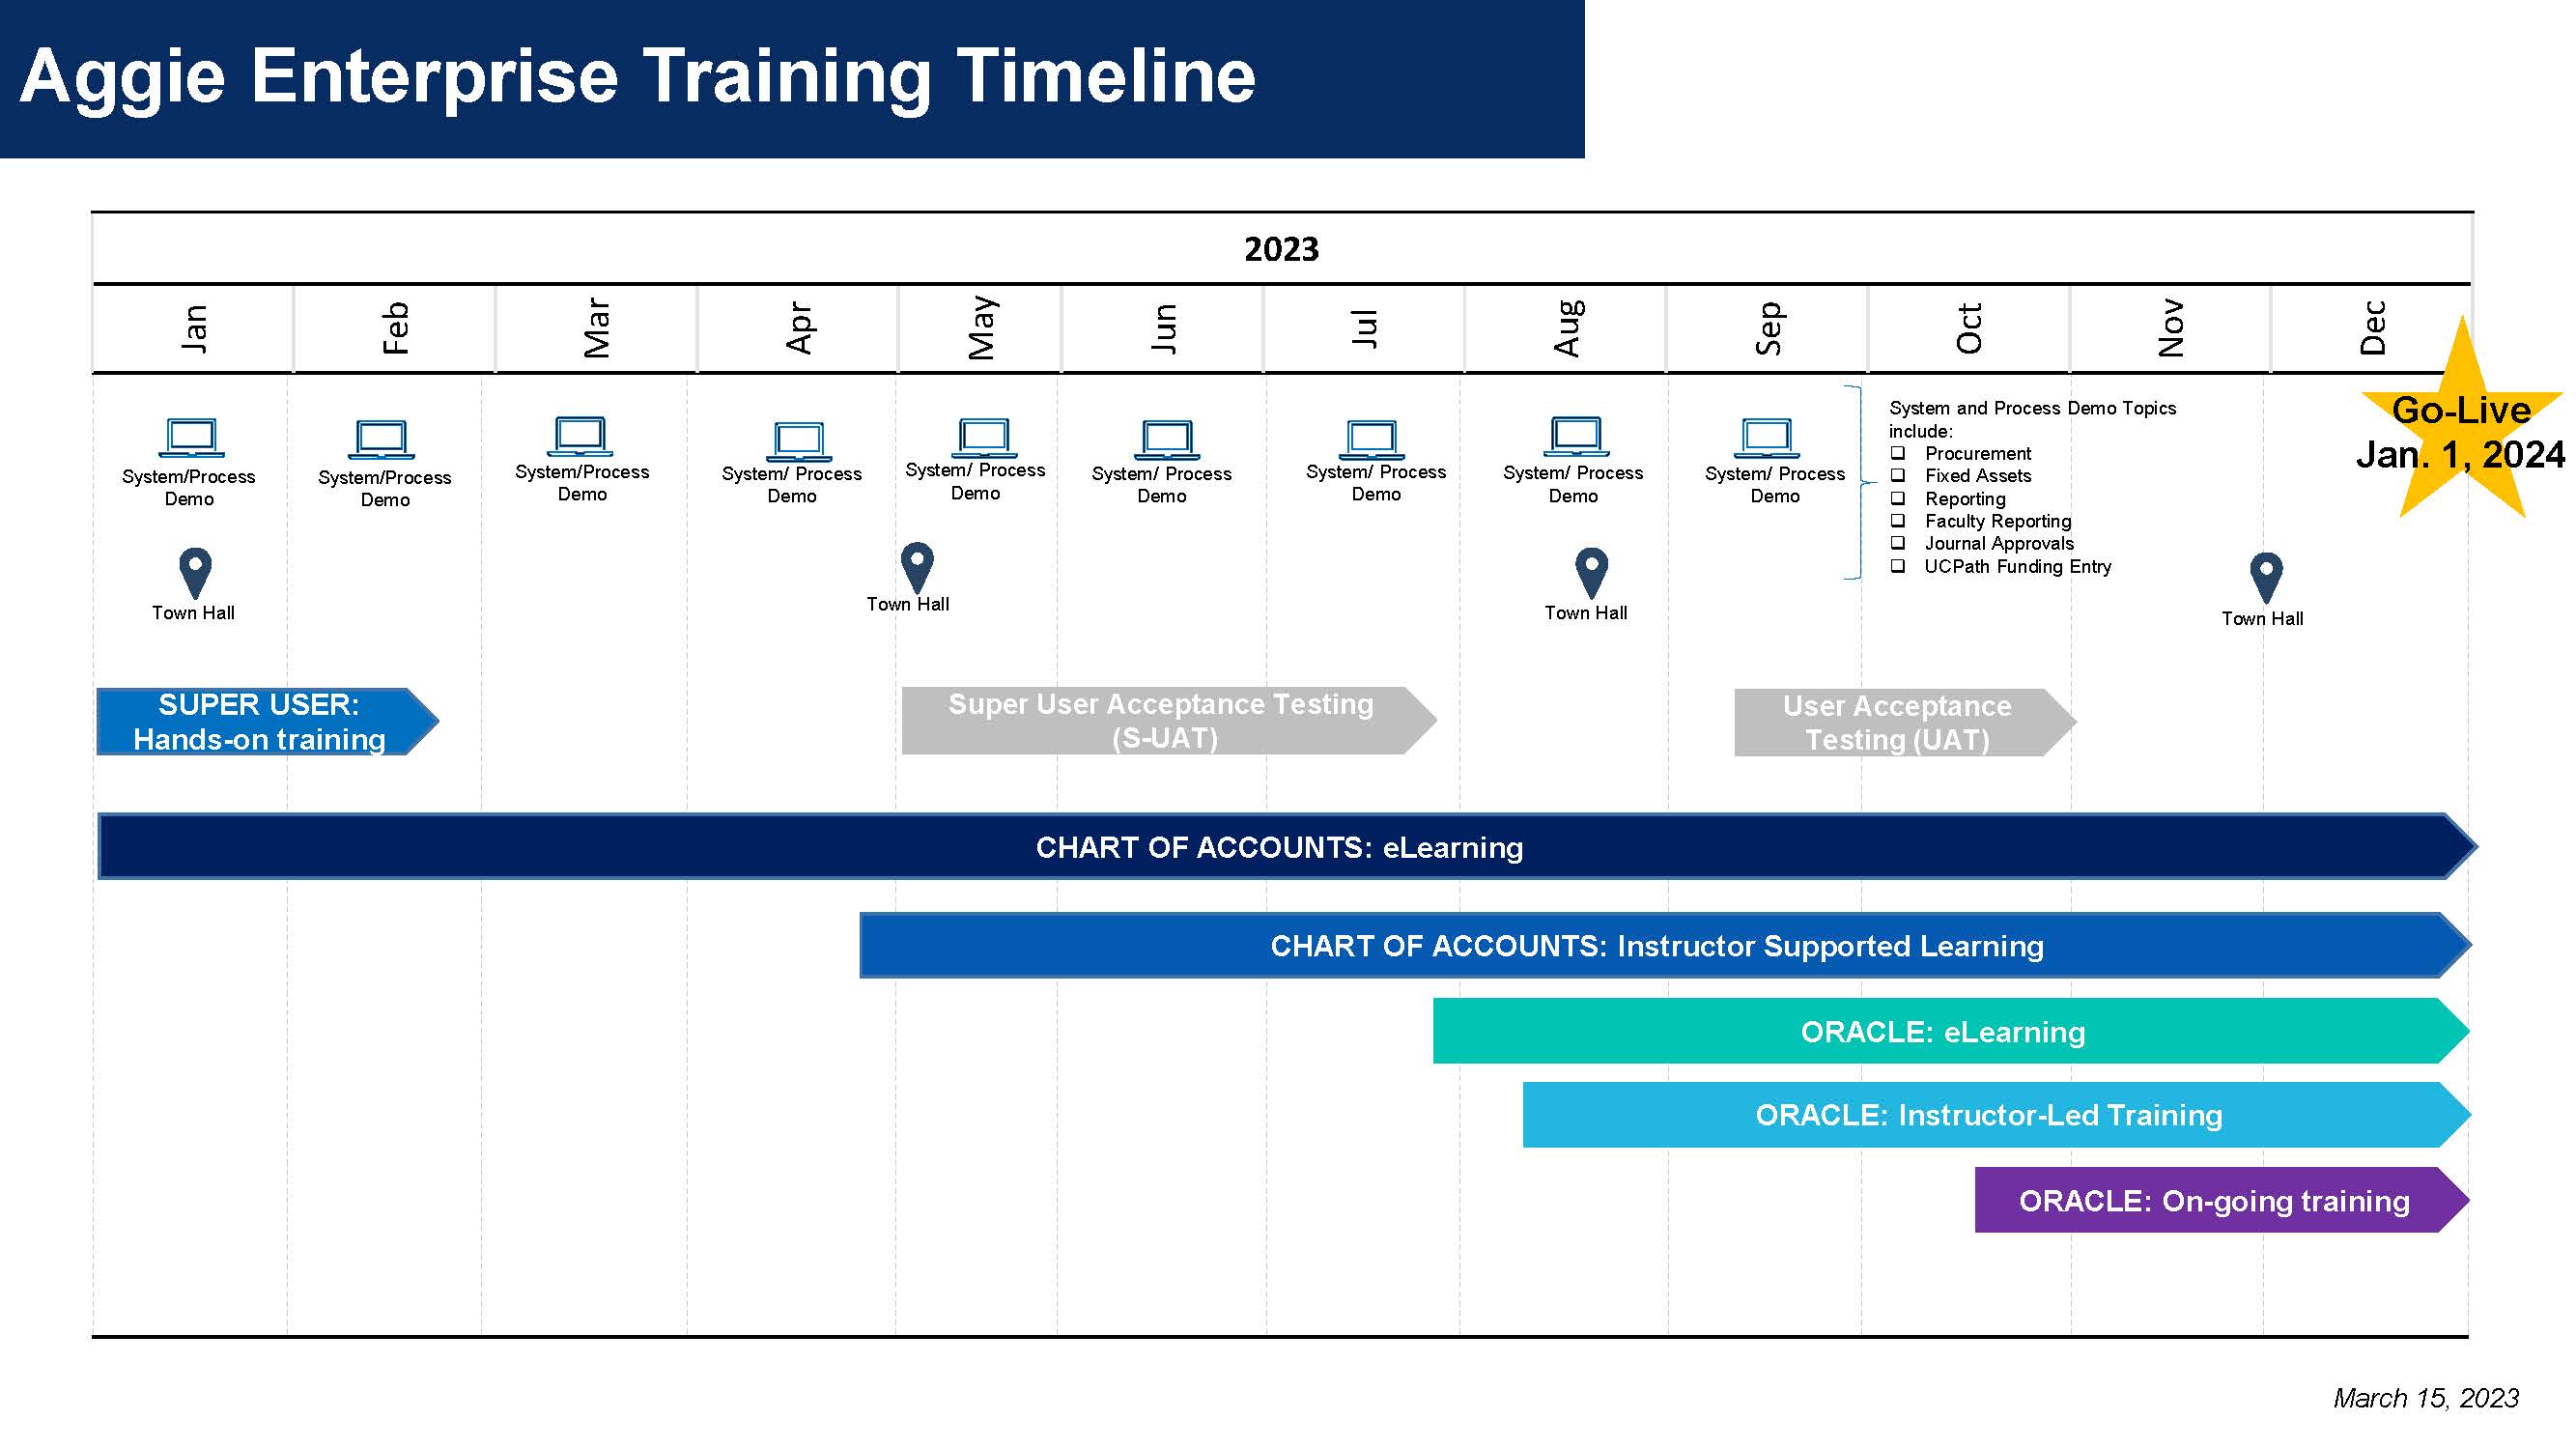 visual graphic of aggie enterprise high level timeline showing Oracle training starting in August 2023